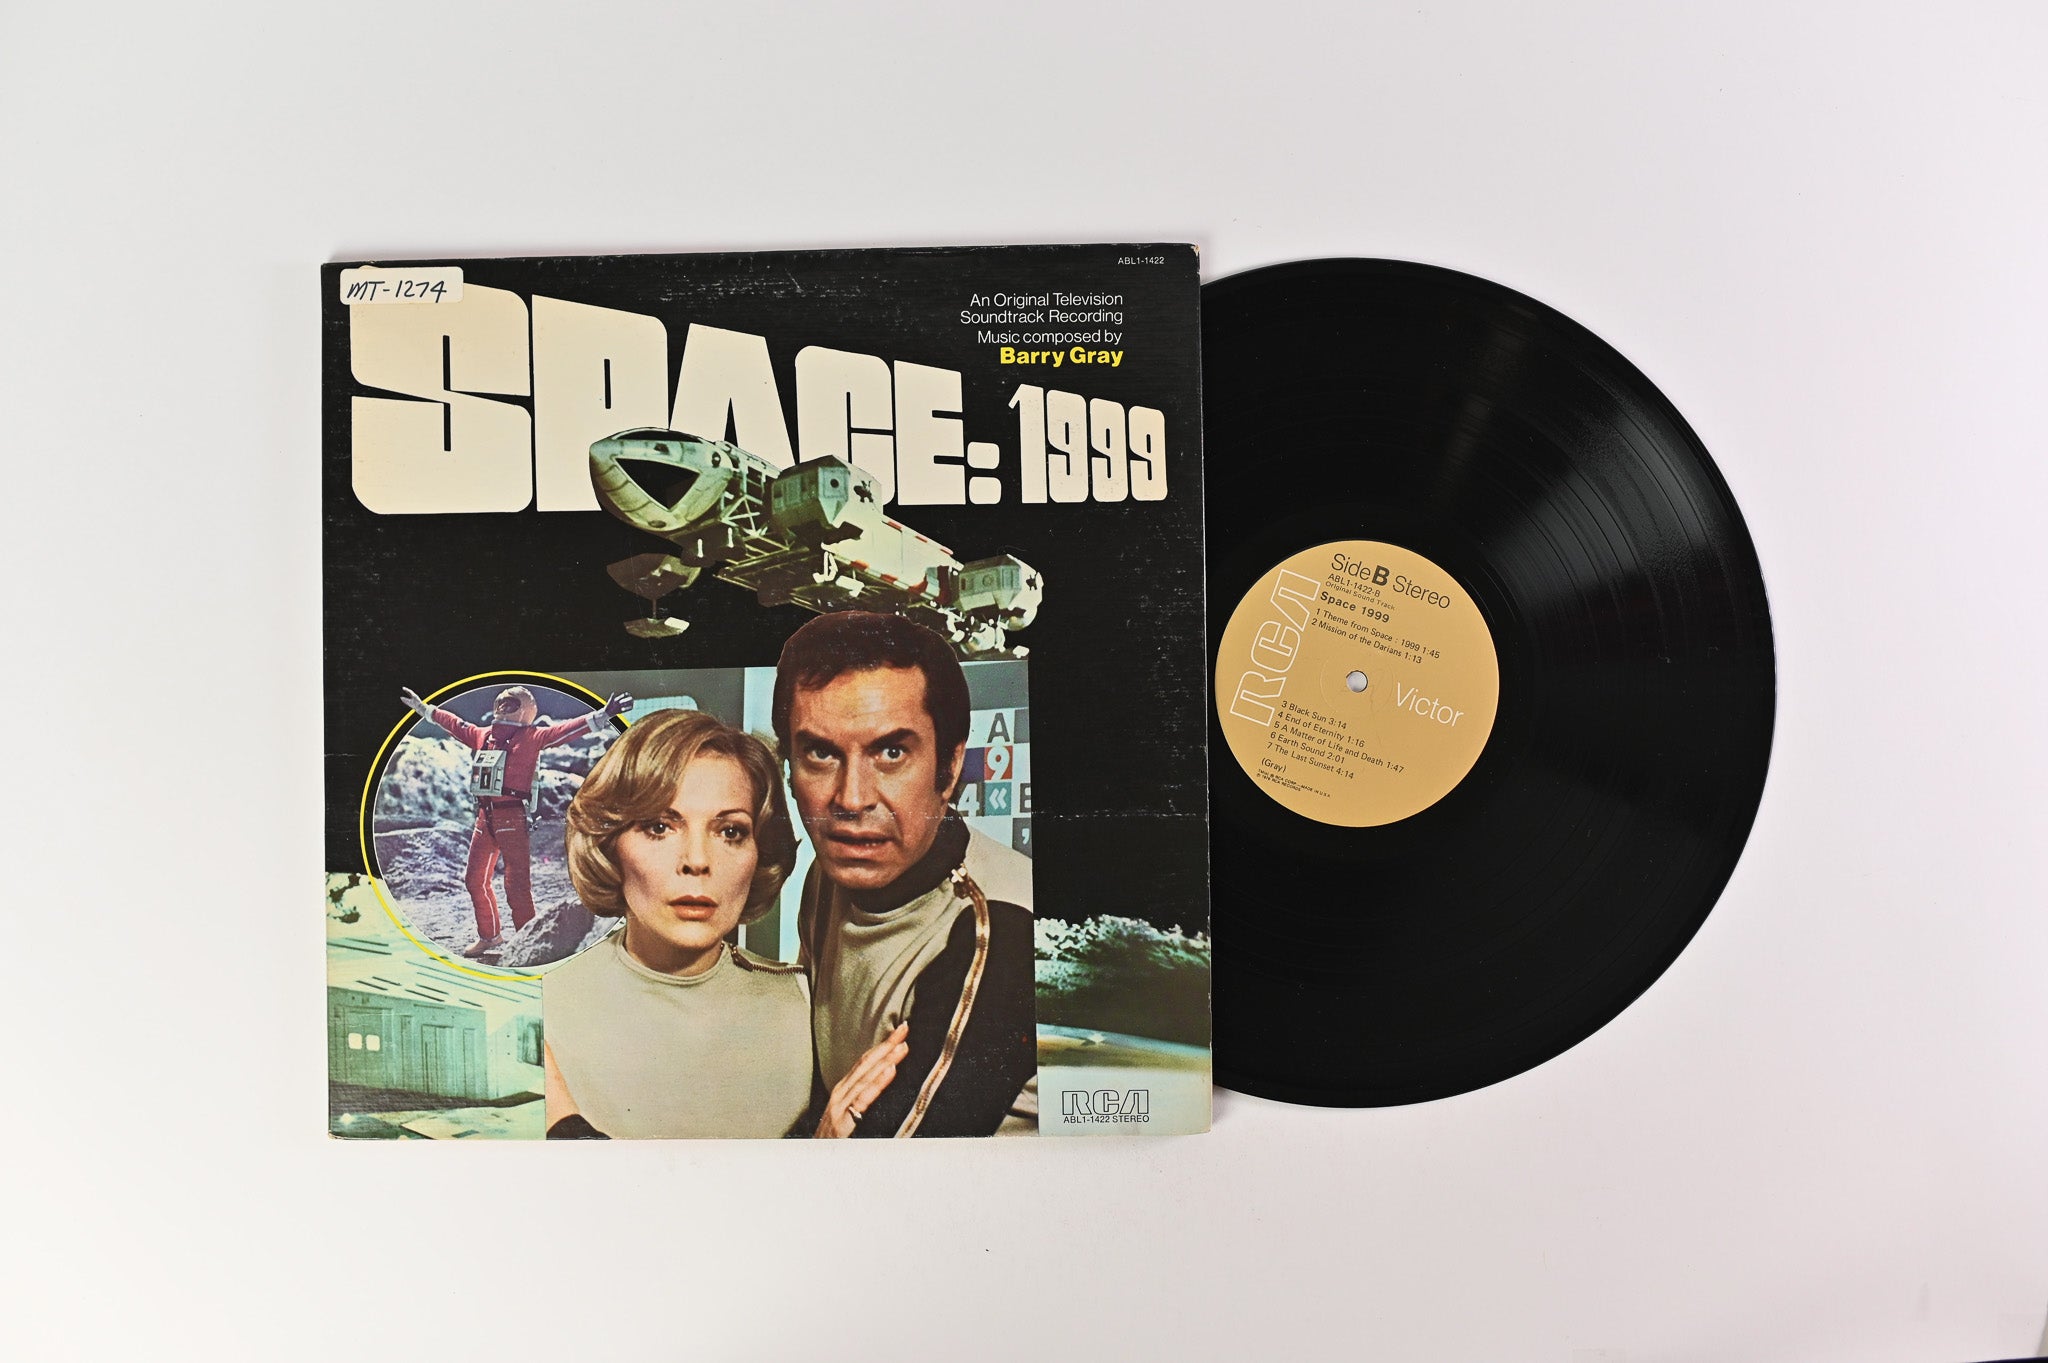 Barry Gray - Space: 1999 (An Original Television Soundtrack Recording) on RCA